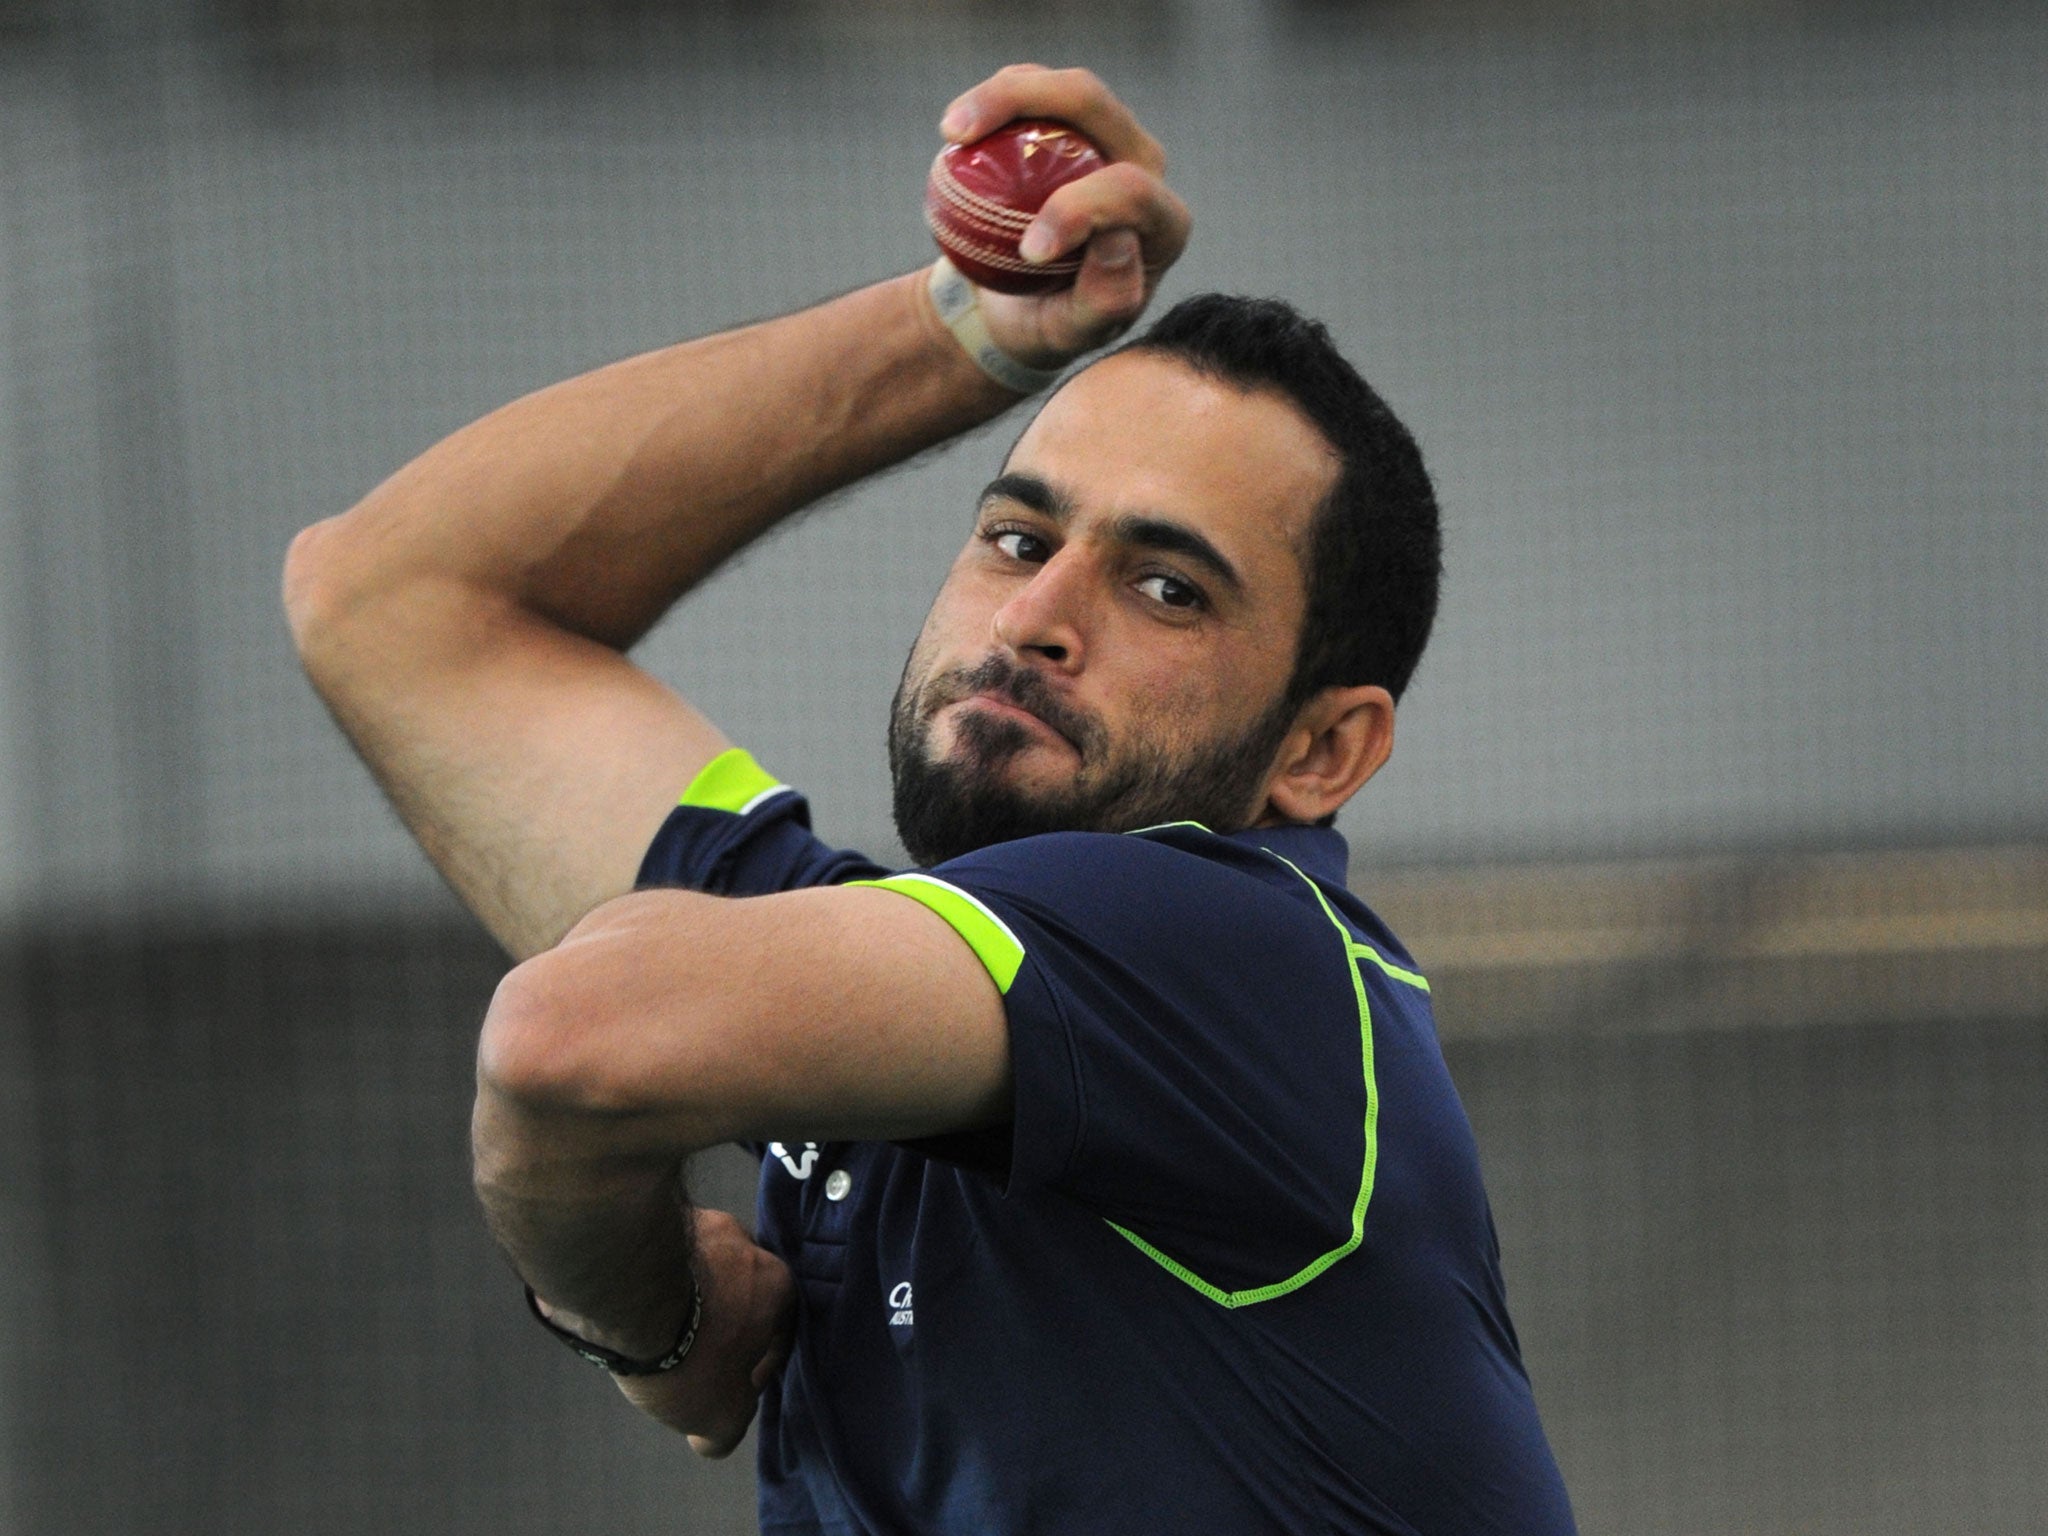 Australia has propelled a little-known bowler called Fawad Ahmed into the Ashes squad